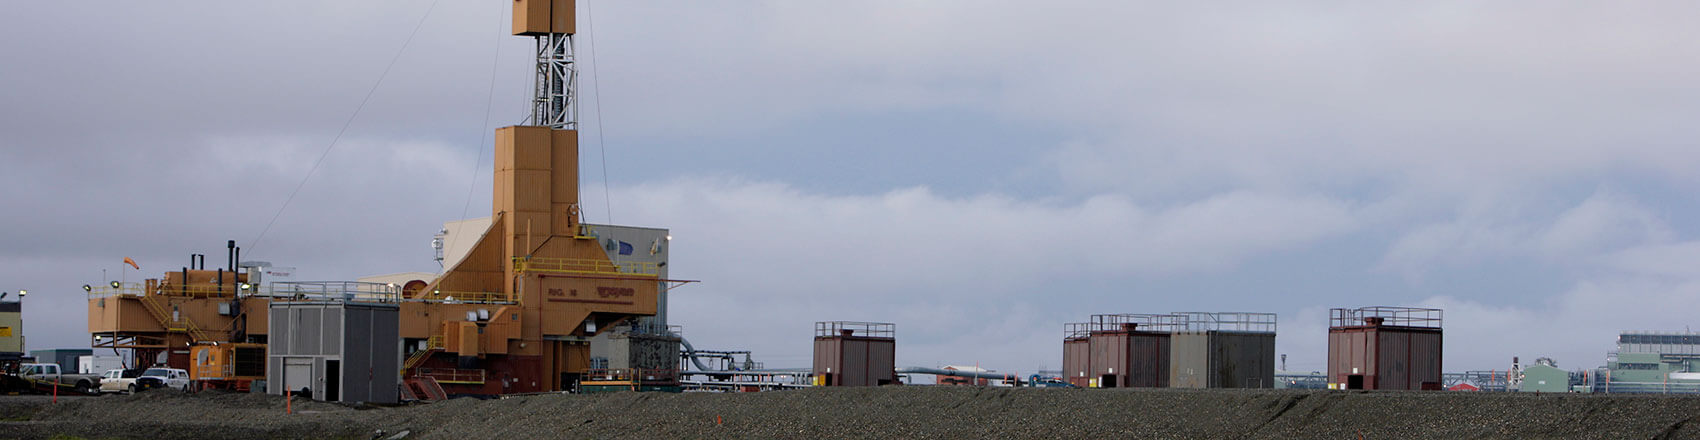 View of Rig against Arctic sky.